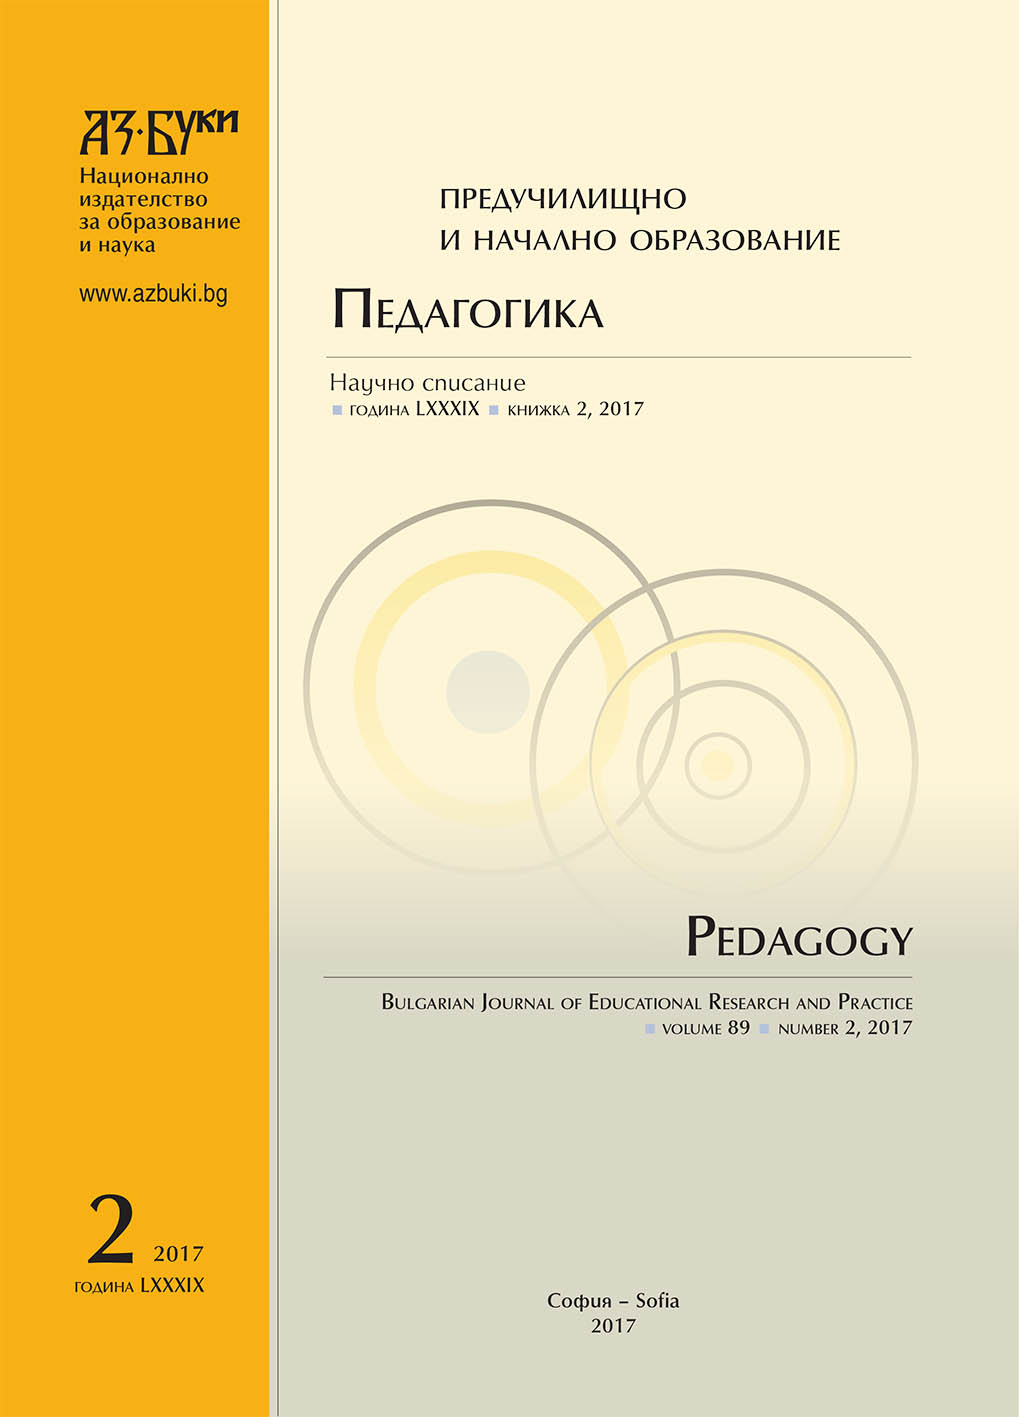 Past Experiences and Present Practices in Teaching Literature. The History of Expressive Reading in Bulgarian Schools Cover Image